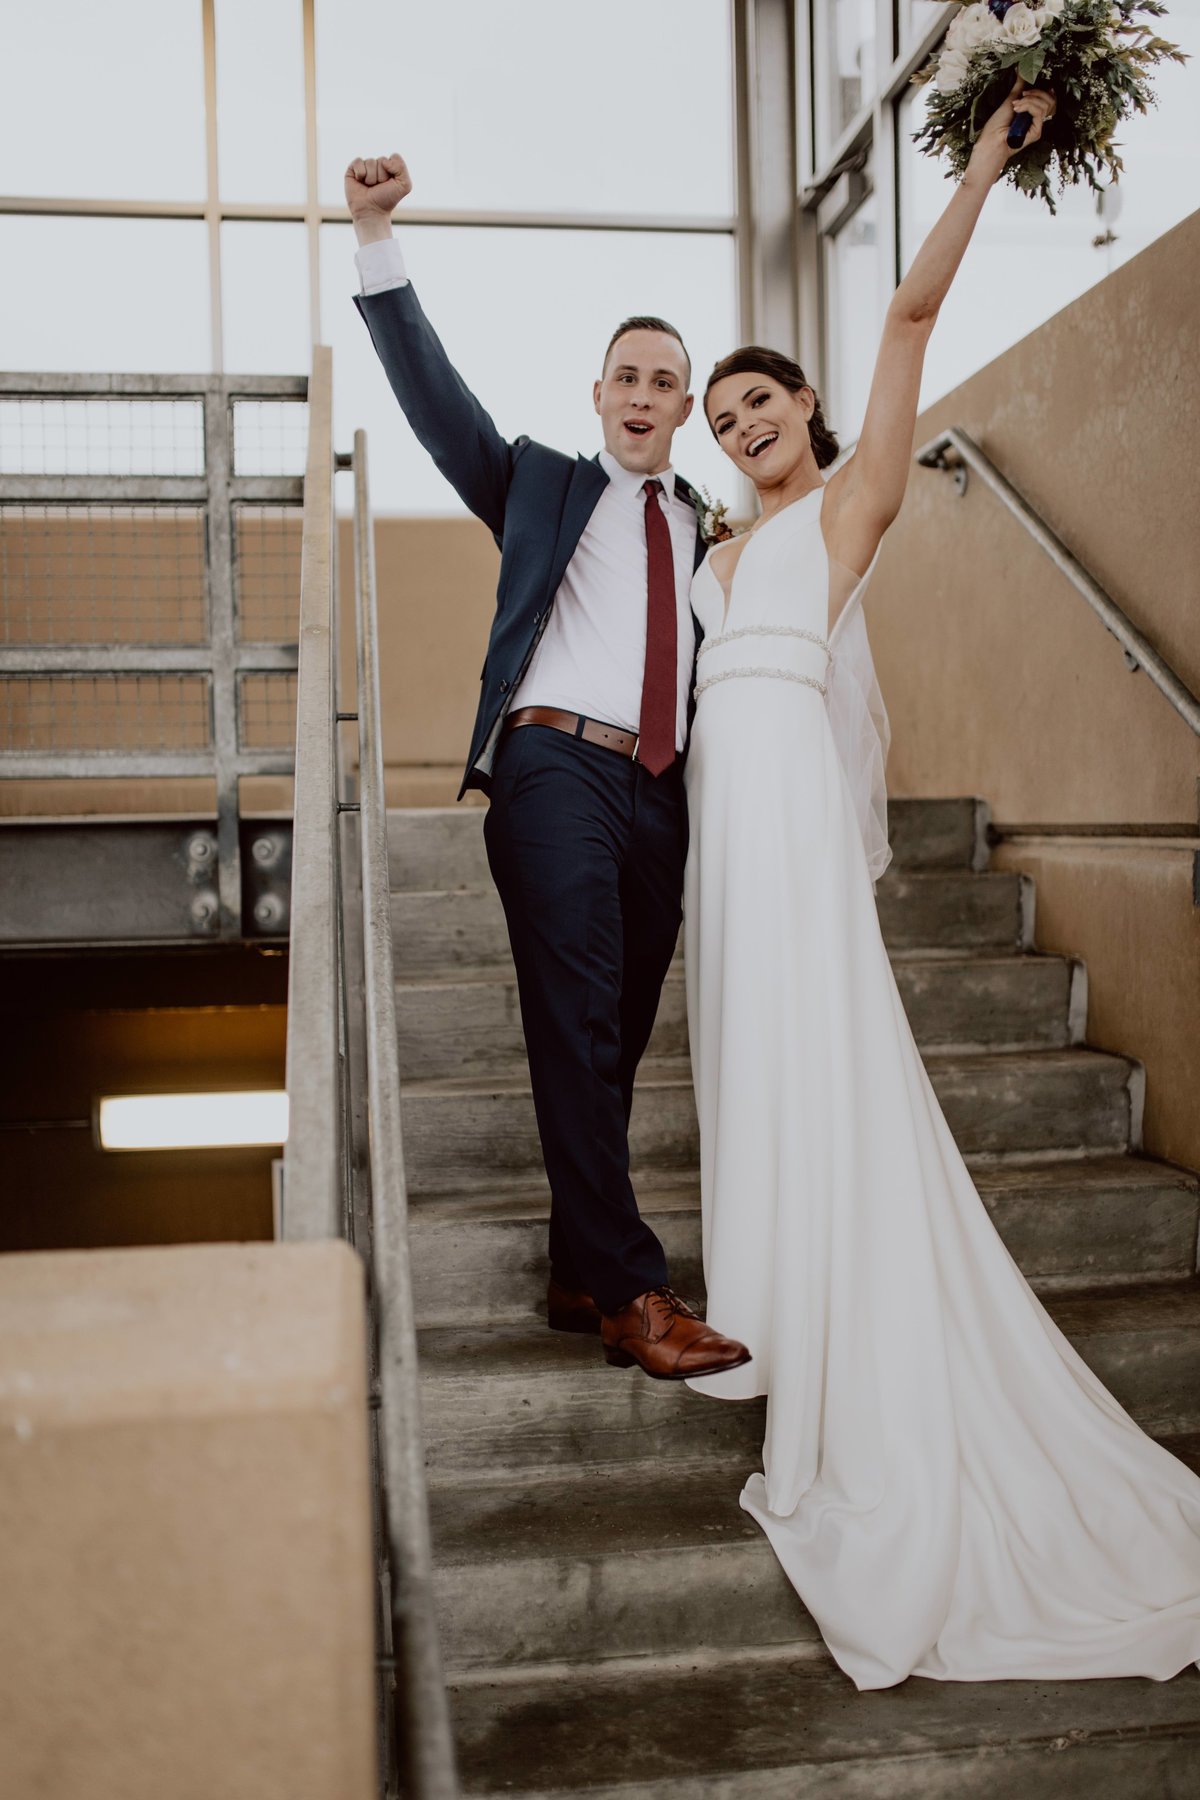 Bride and groom throwing arms up and celebrating their marriage on stairwell.